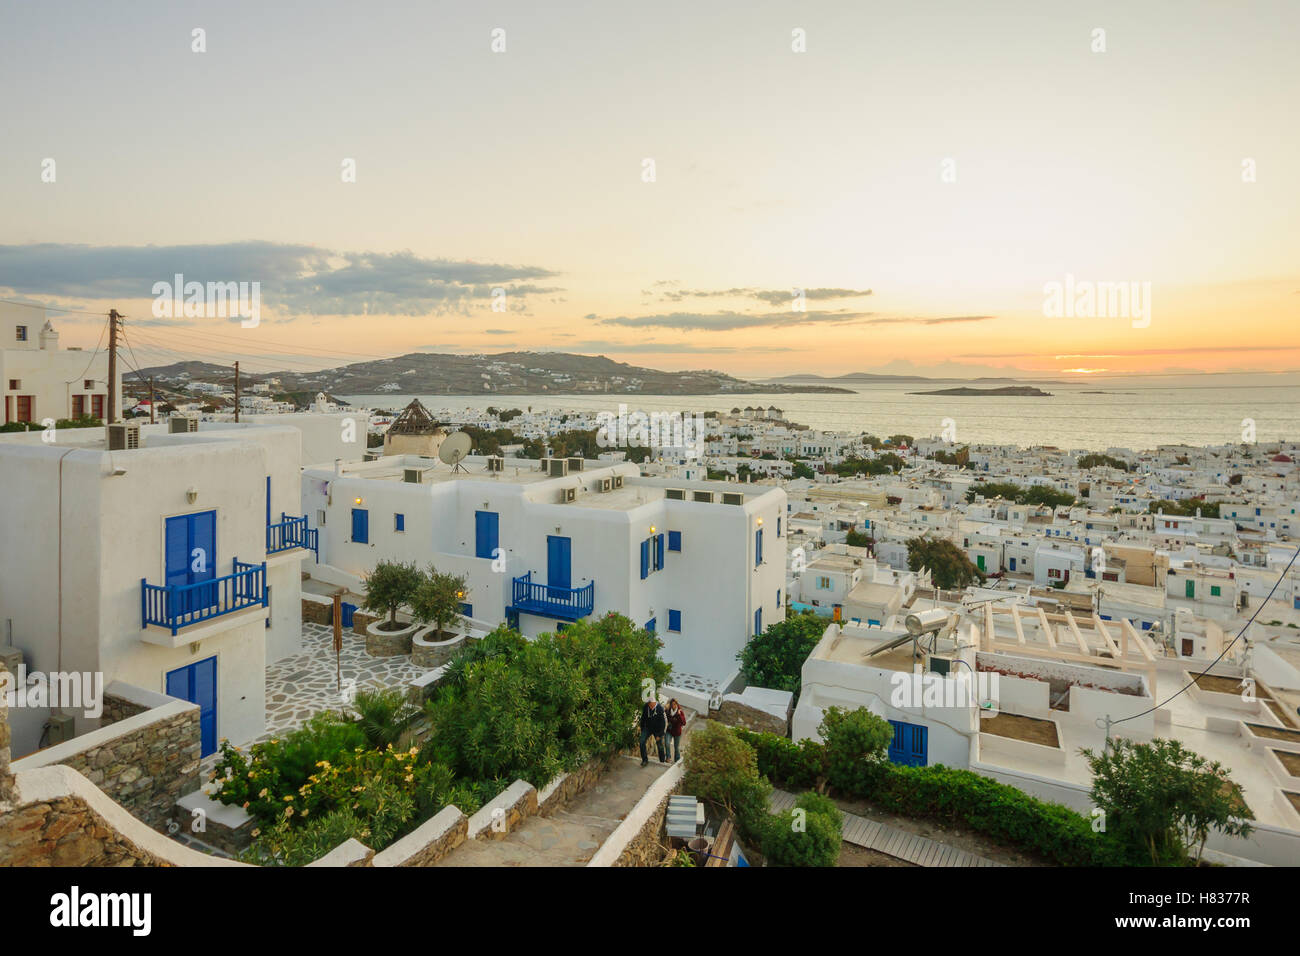 MYKONOS, GREECE - OCTOBER 02, 2011: Sunset scene of the Village, with local businesses, windmills, locals and visitors, in Mykon Stock Photo